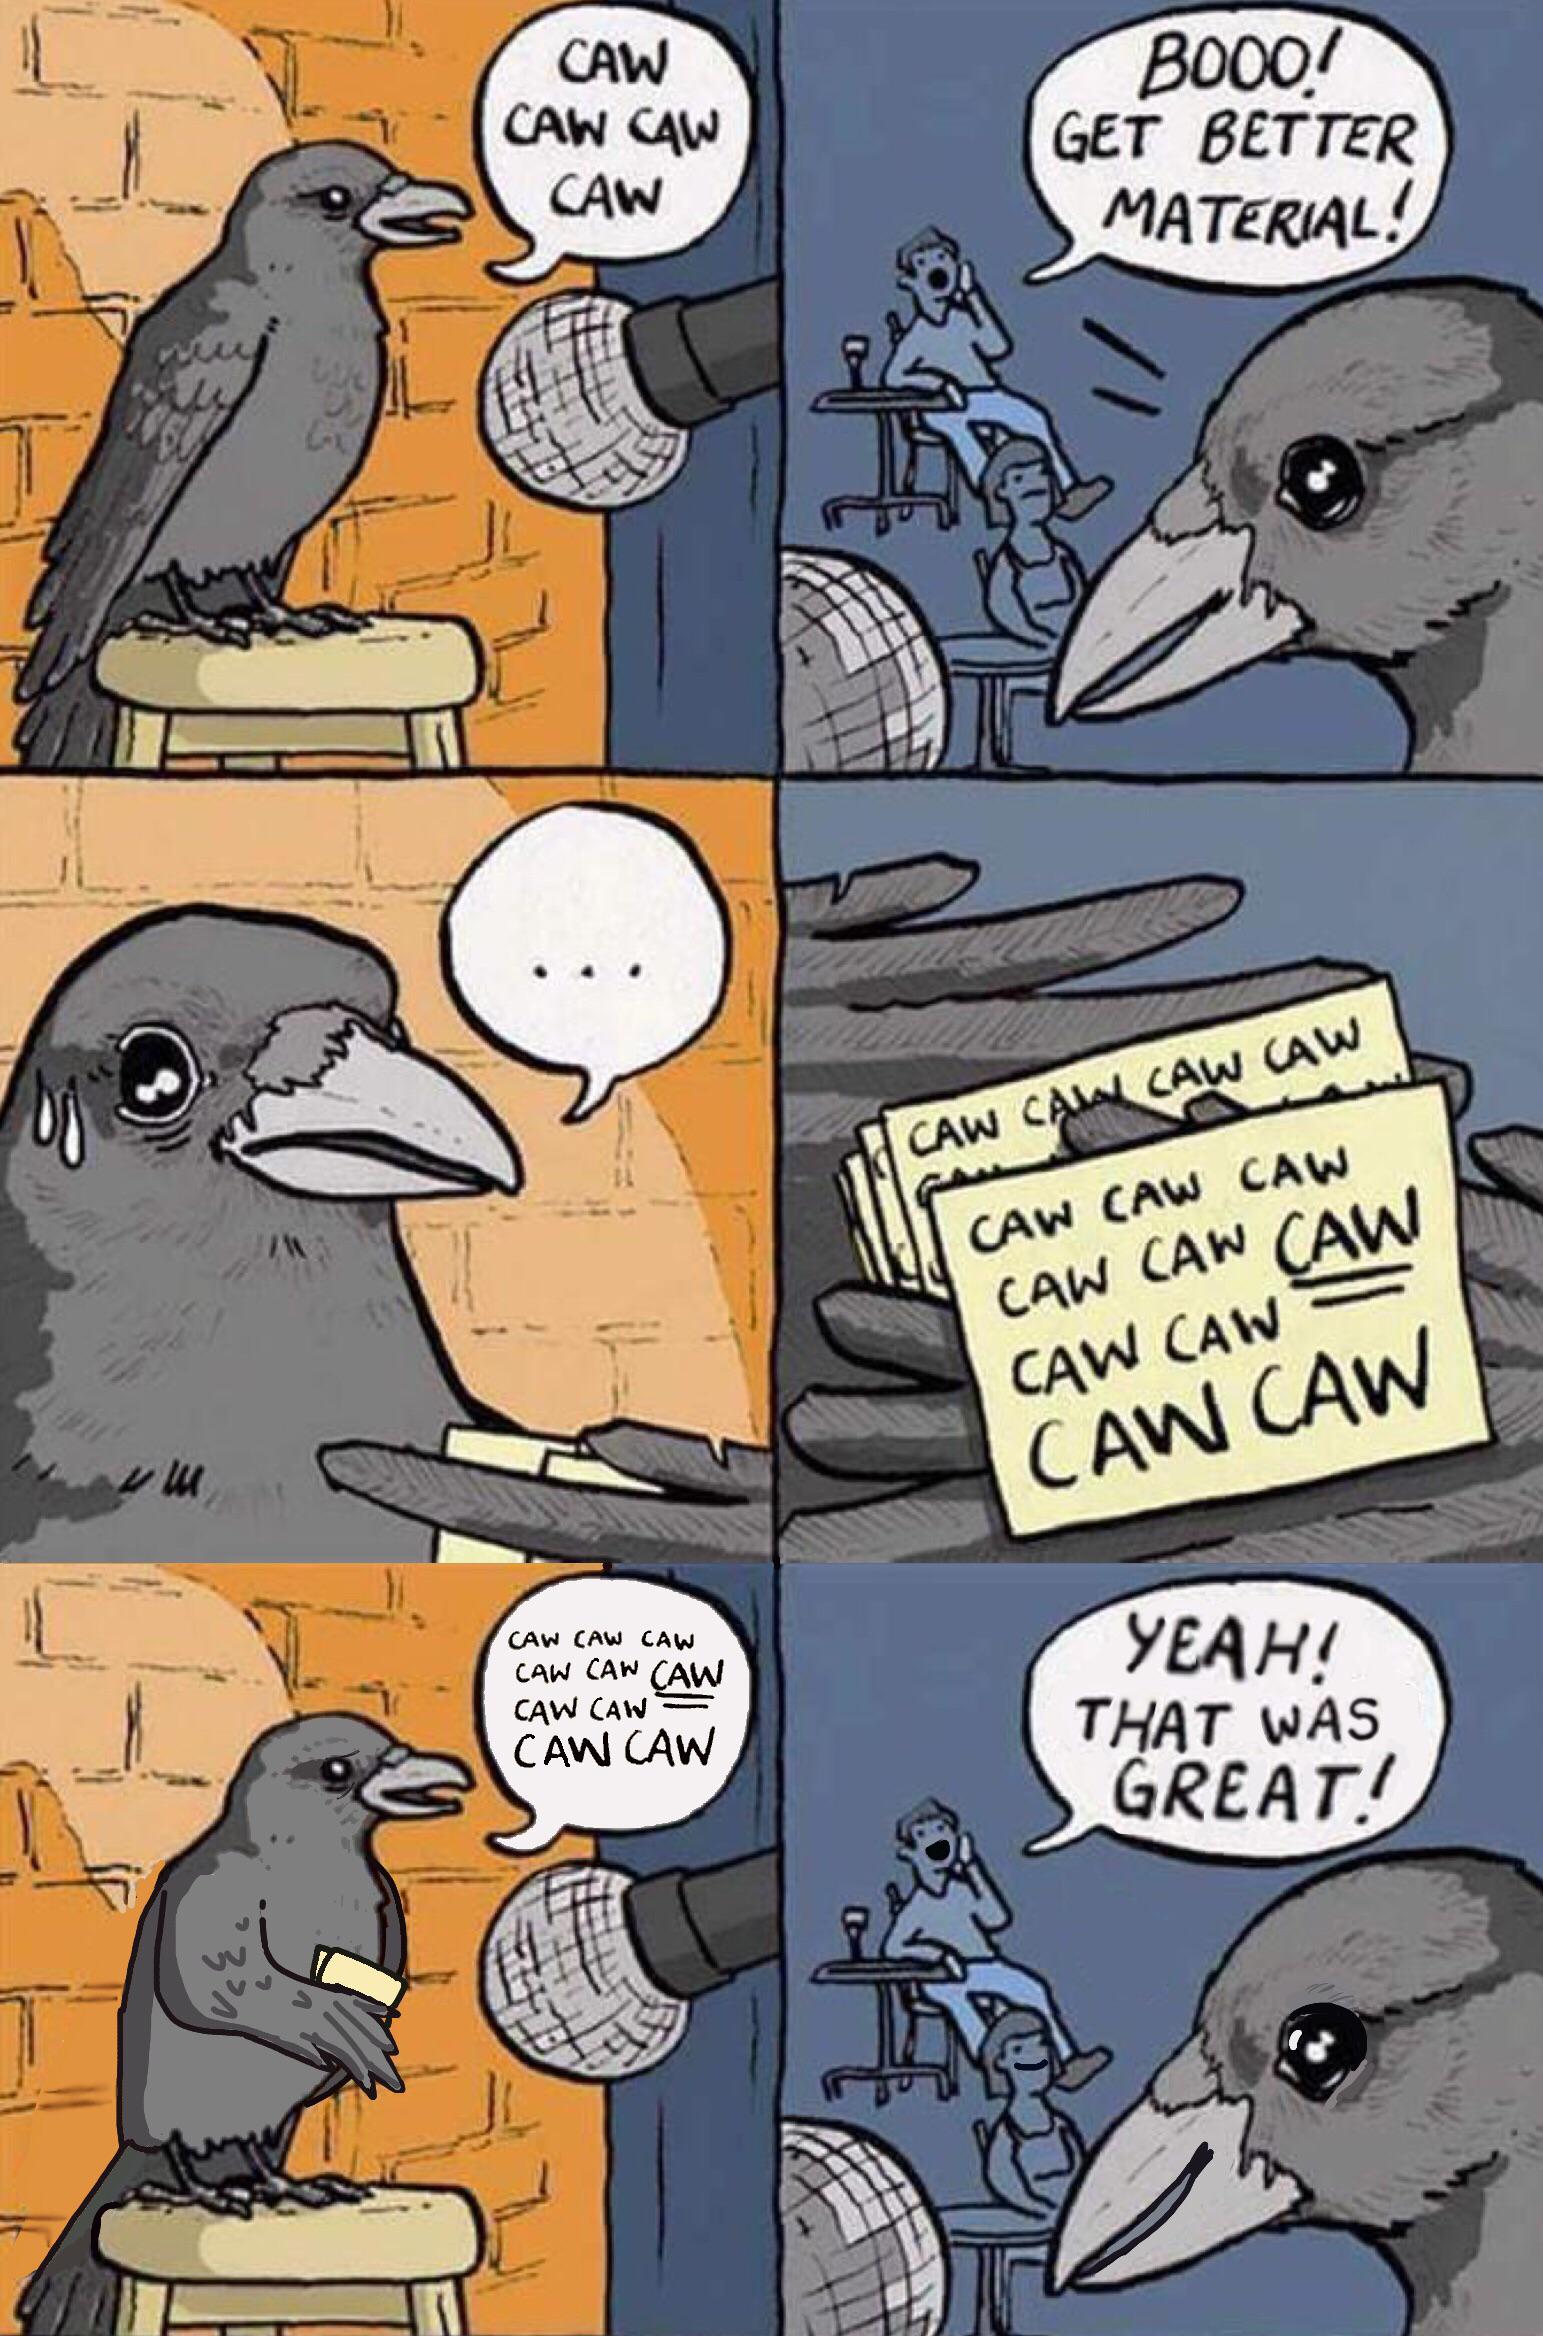 Wholesome memes, CAWmedian, False Knees Wholesome Memes Wholesome memes, CAWmedian, False Knees text: CAW CAW CAW CAW — BOOO./ GET BETTER MATERIAL! CAW CAW THAT WAS GREAr./ 